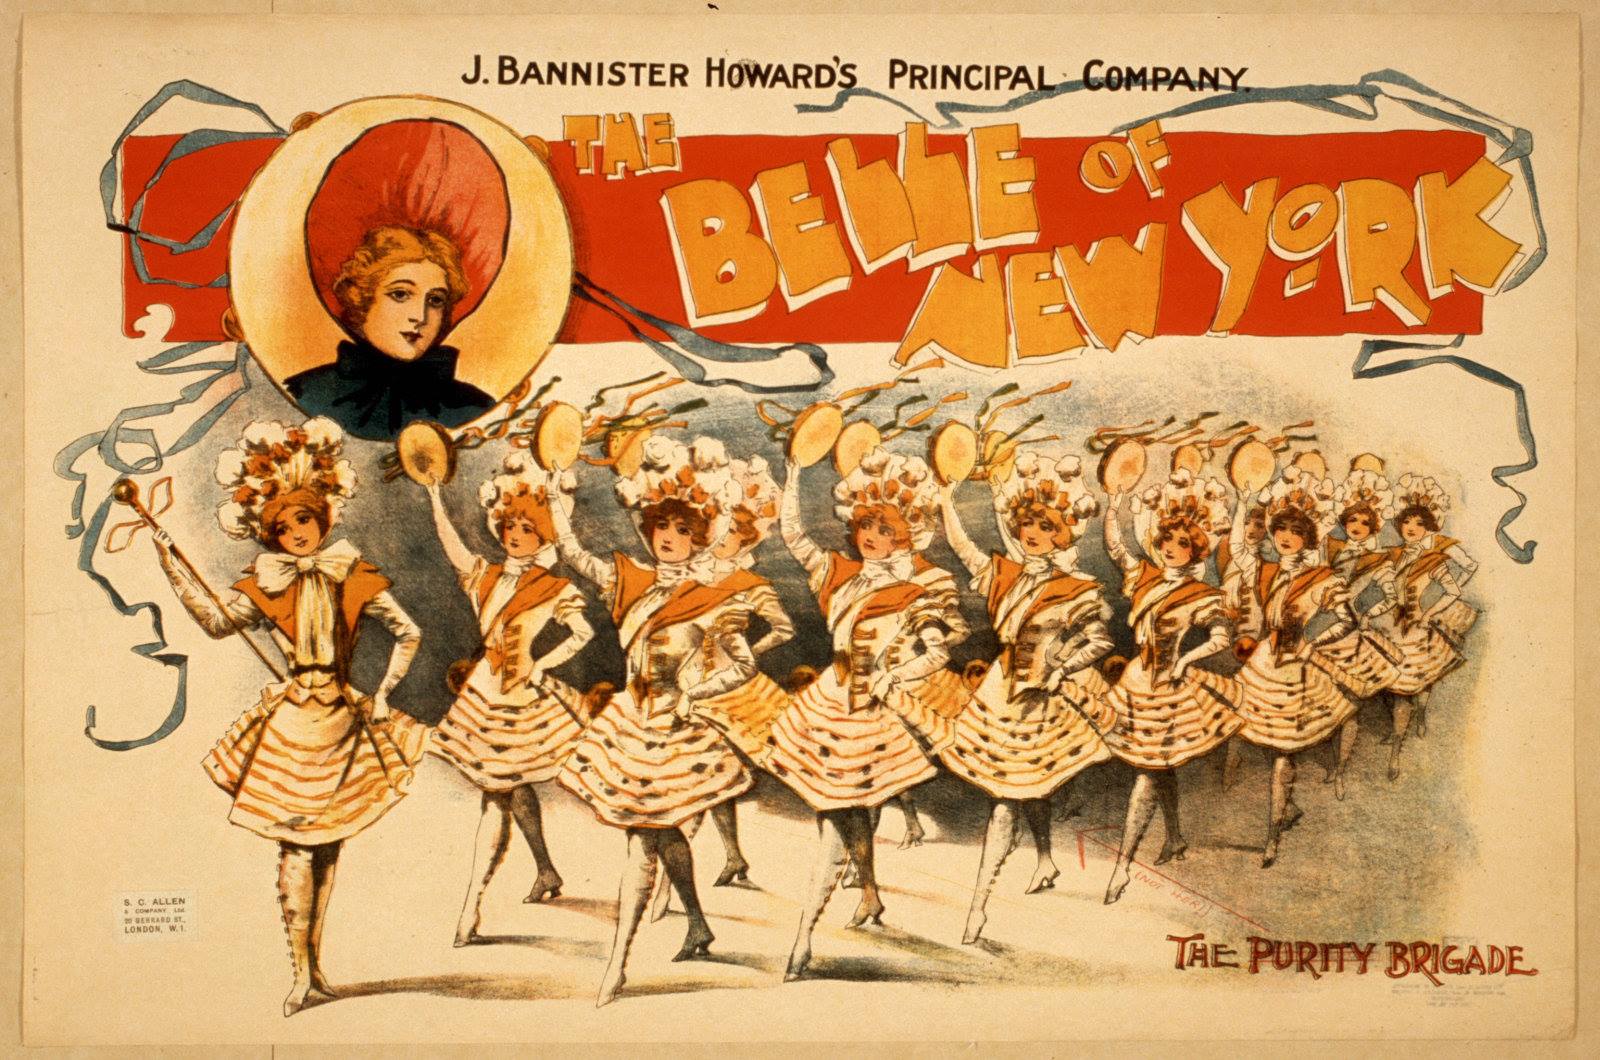 Poster for the "Belle of New York" featuring the so called "Purity Brigade." (Photo: Collection Dario Salvi)